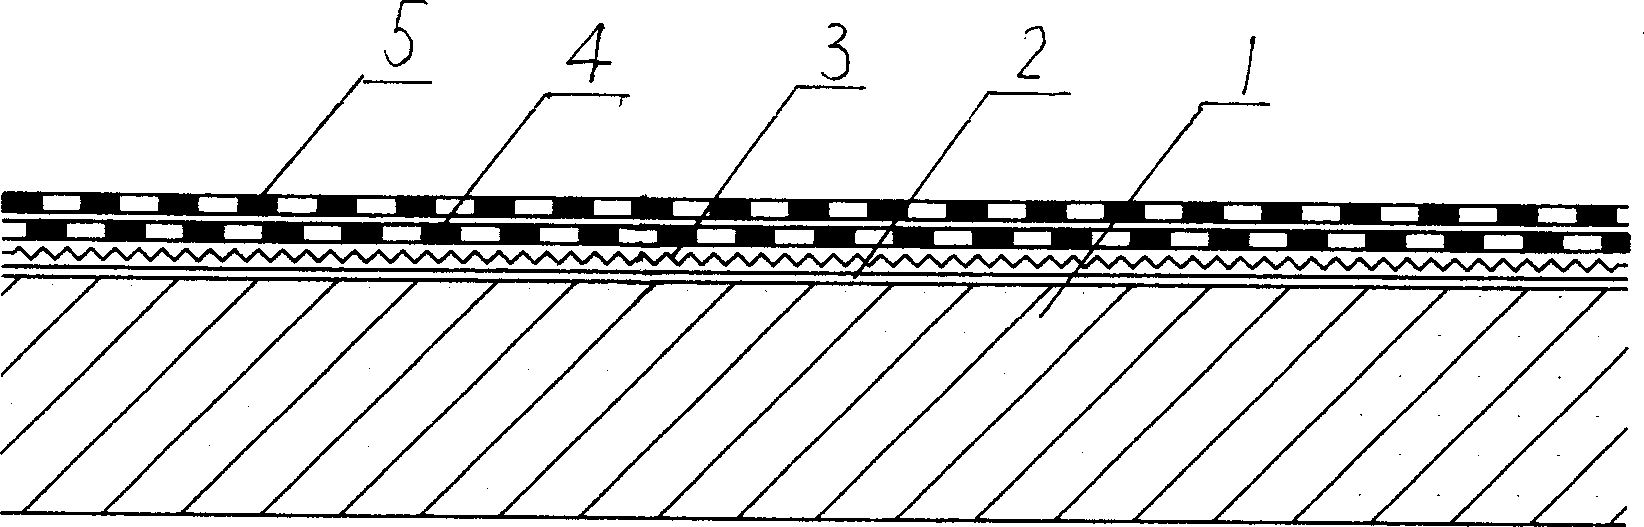 Laminated composite water-proof structure with double side self adhesive water-proof coil as base layer and its construction method